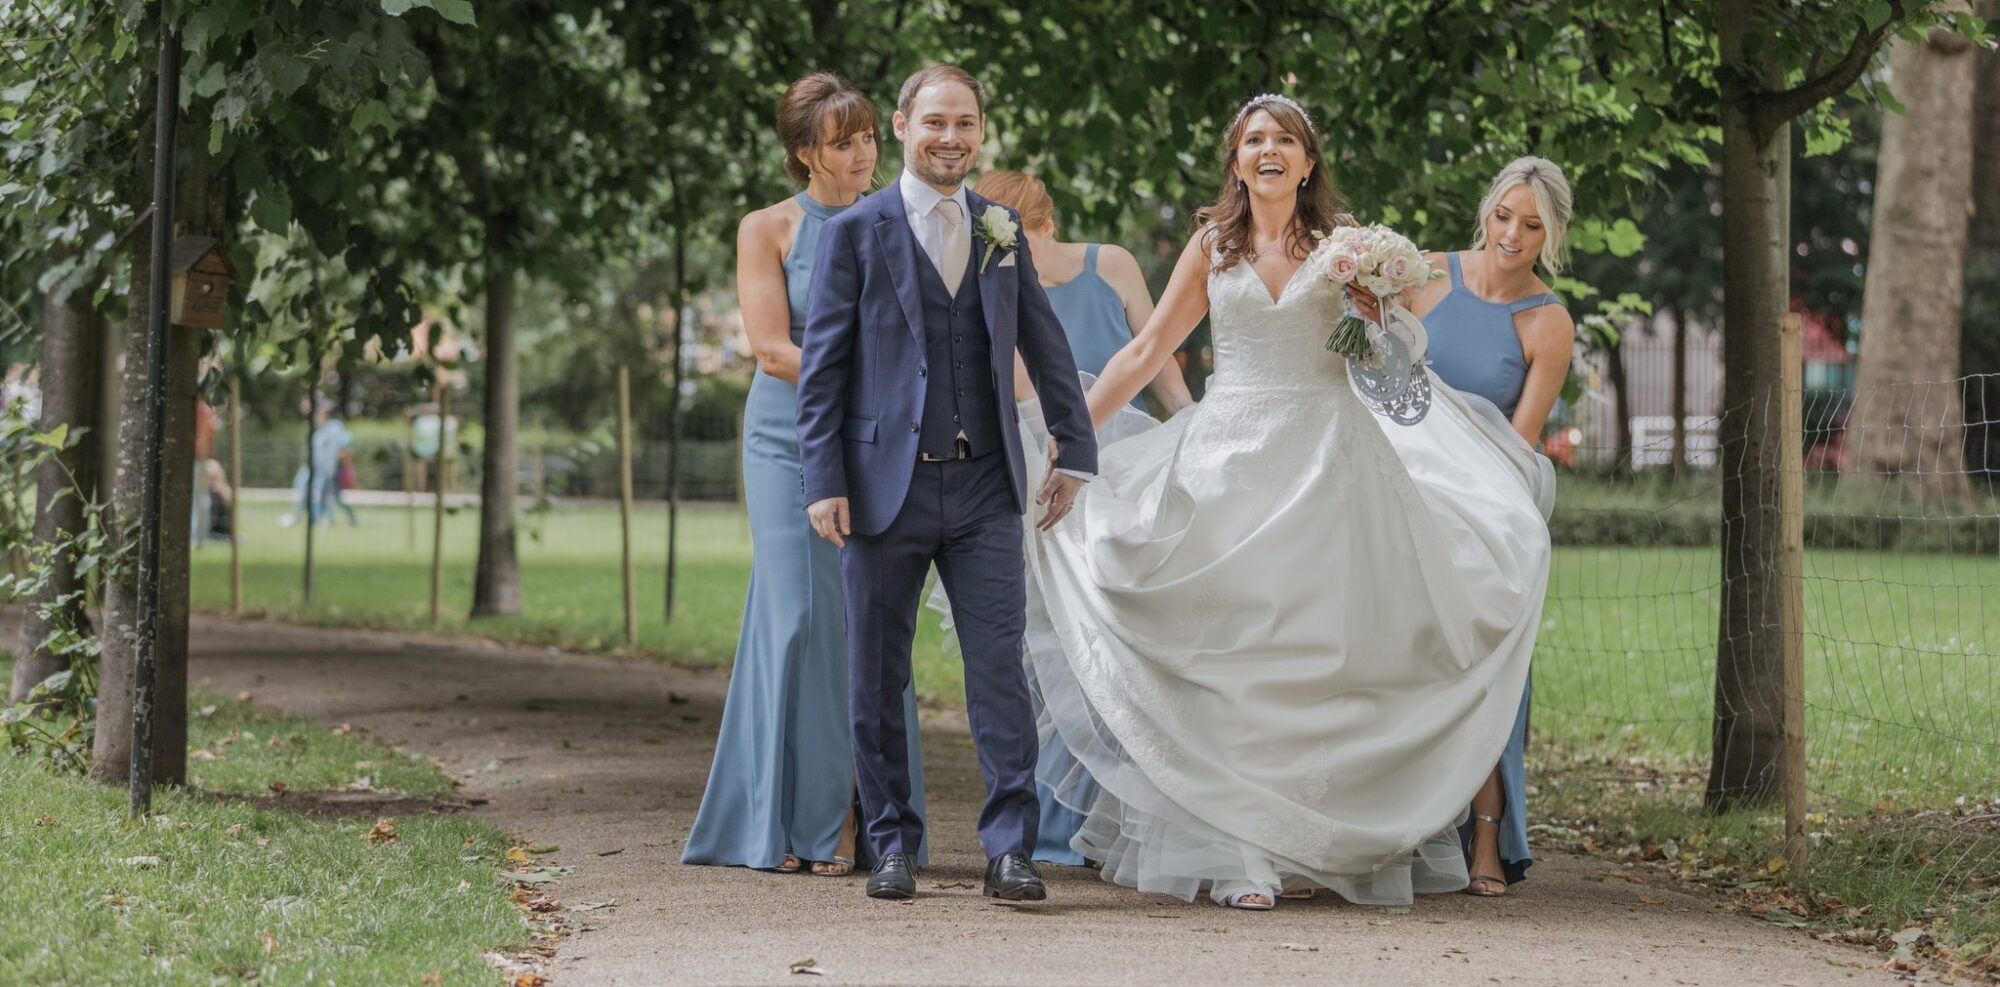 laughing bride groom bridesmaids stroll russell square park central london oxfordshire wedding photographers